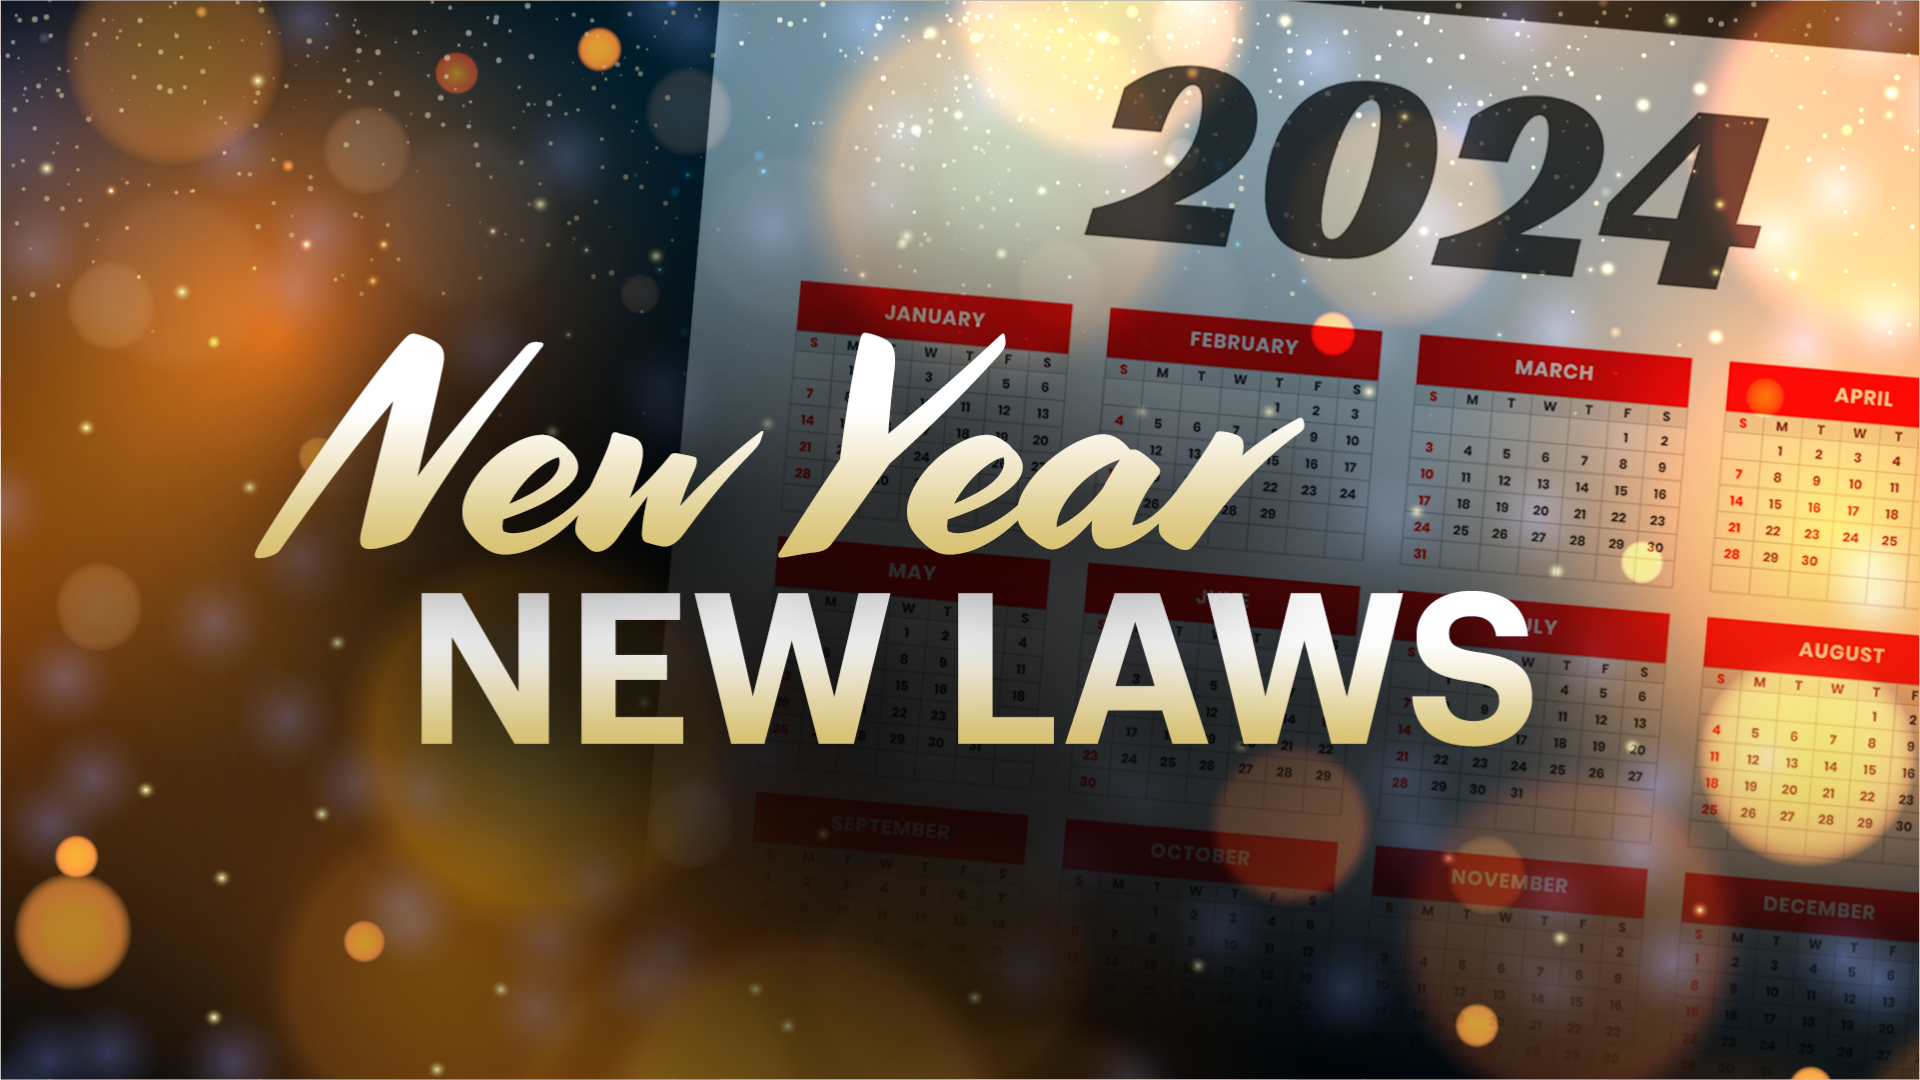 These new laws in New Jersey take effect in 2024